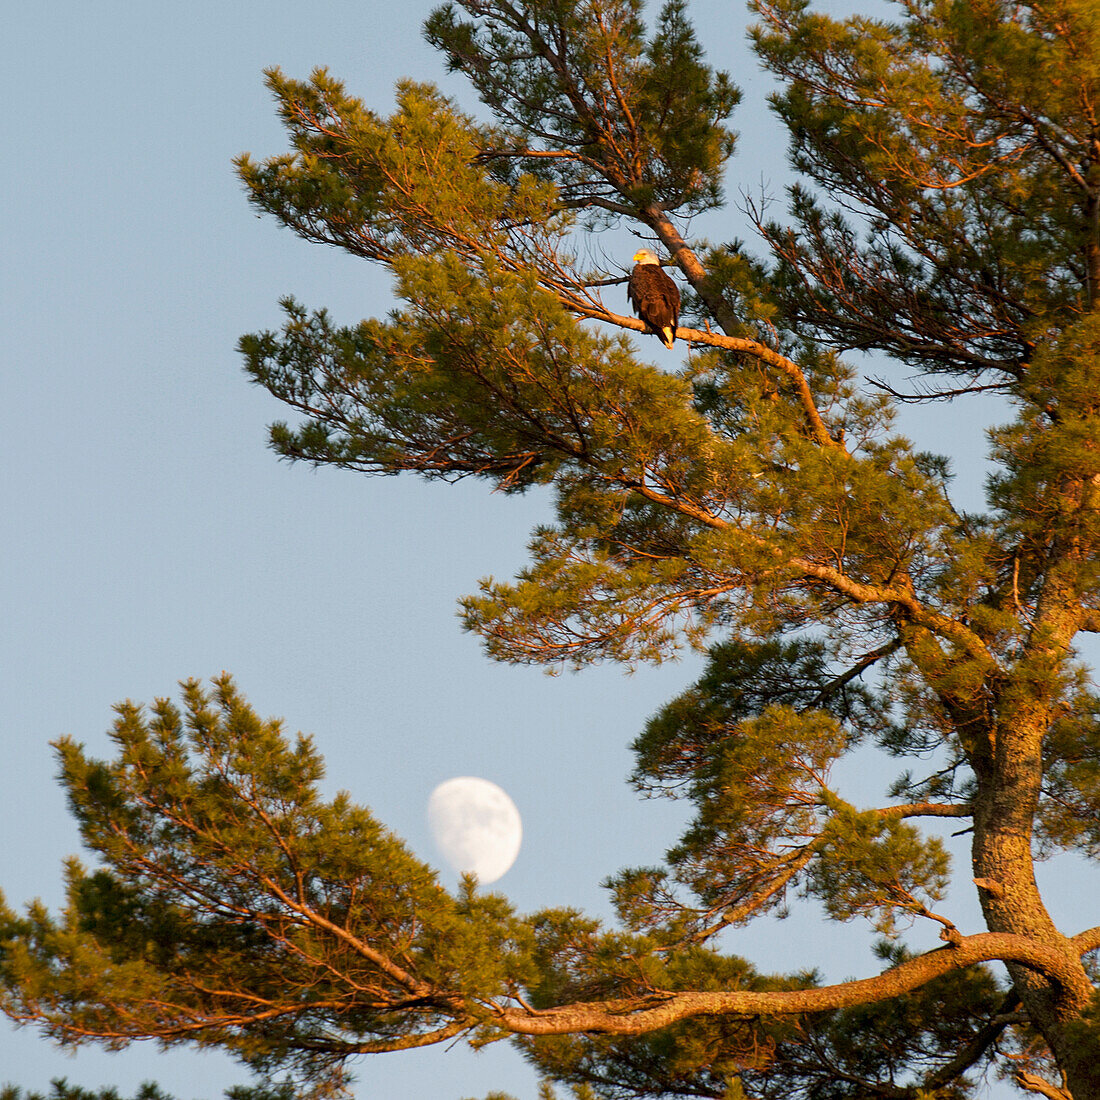 'A Hawk Sits In A Tree With The Moon In A Blue Sky; Lake Of The Woods, Ontario, Canada'